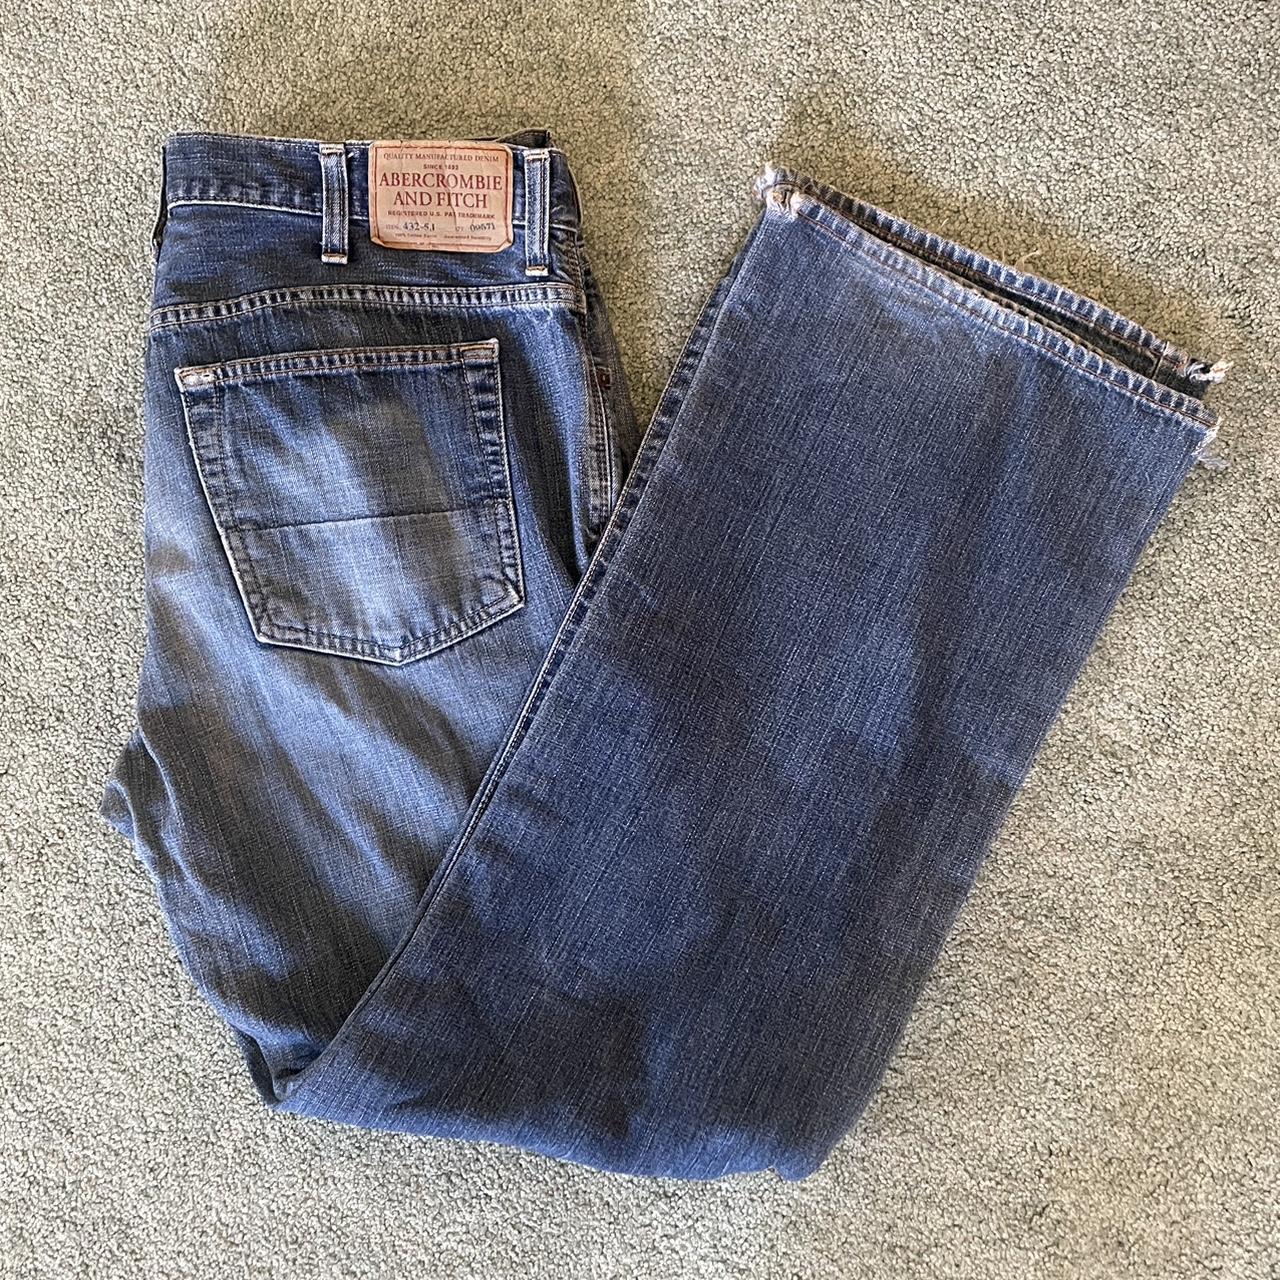 Blue Abercrombie & Fitch bootcut jeans Nice wash and... - Depop